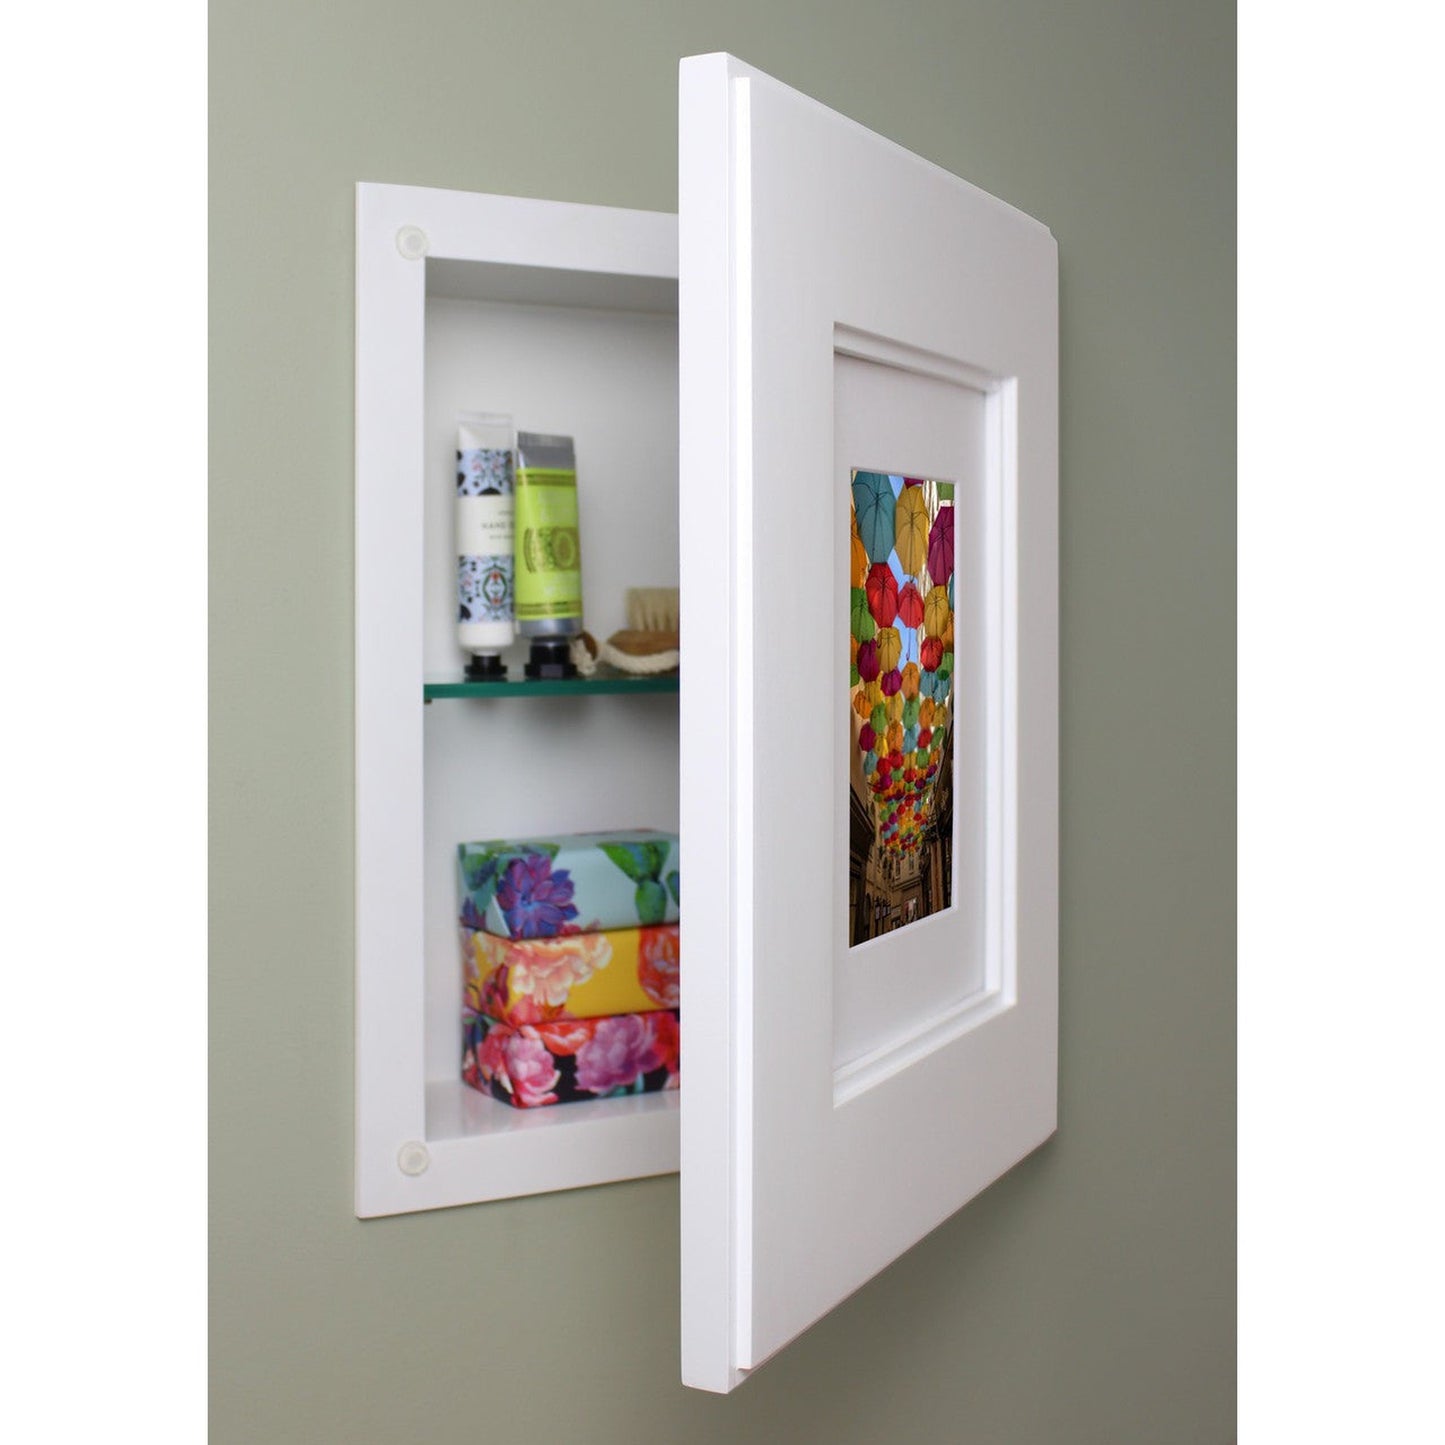 Fox Hollow Furnishings 11" x 14" White Compact Portrait Shaker Standard Depth Recessed Picture Frame Medicine Cabinet